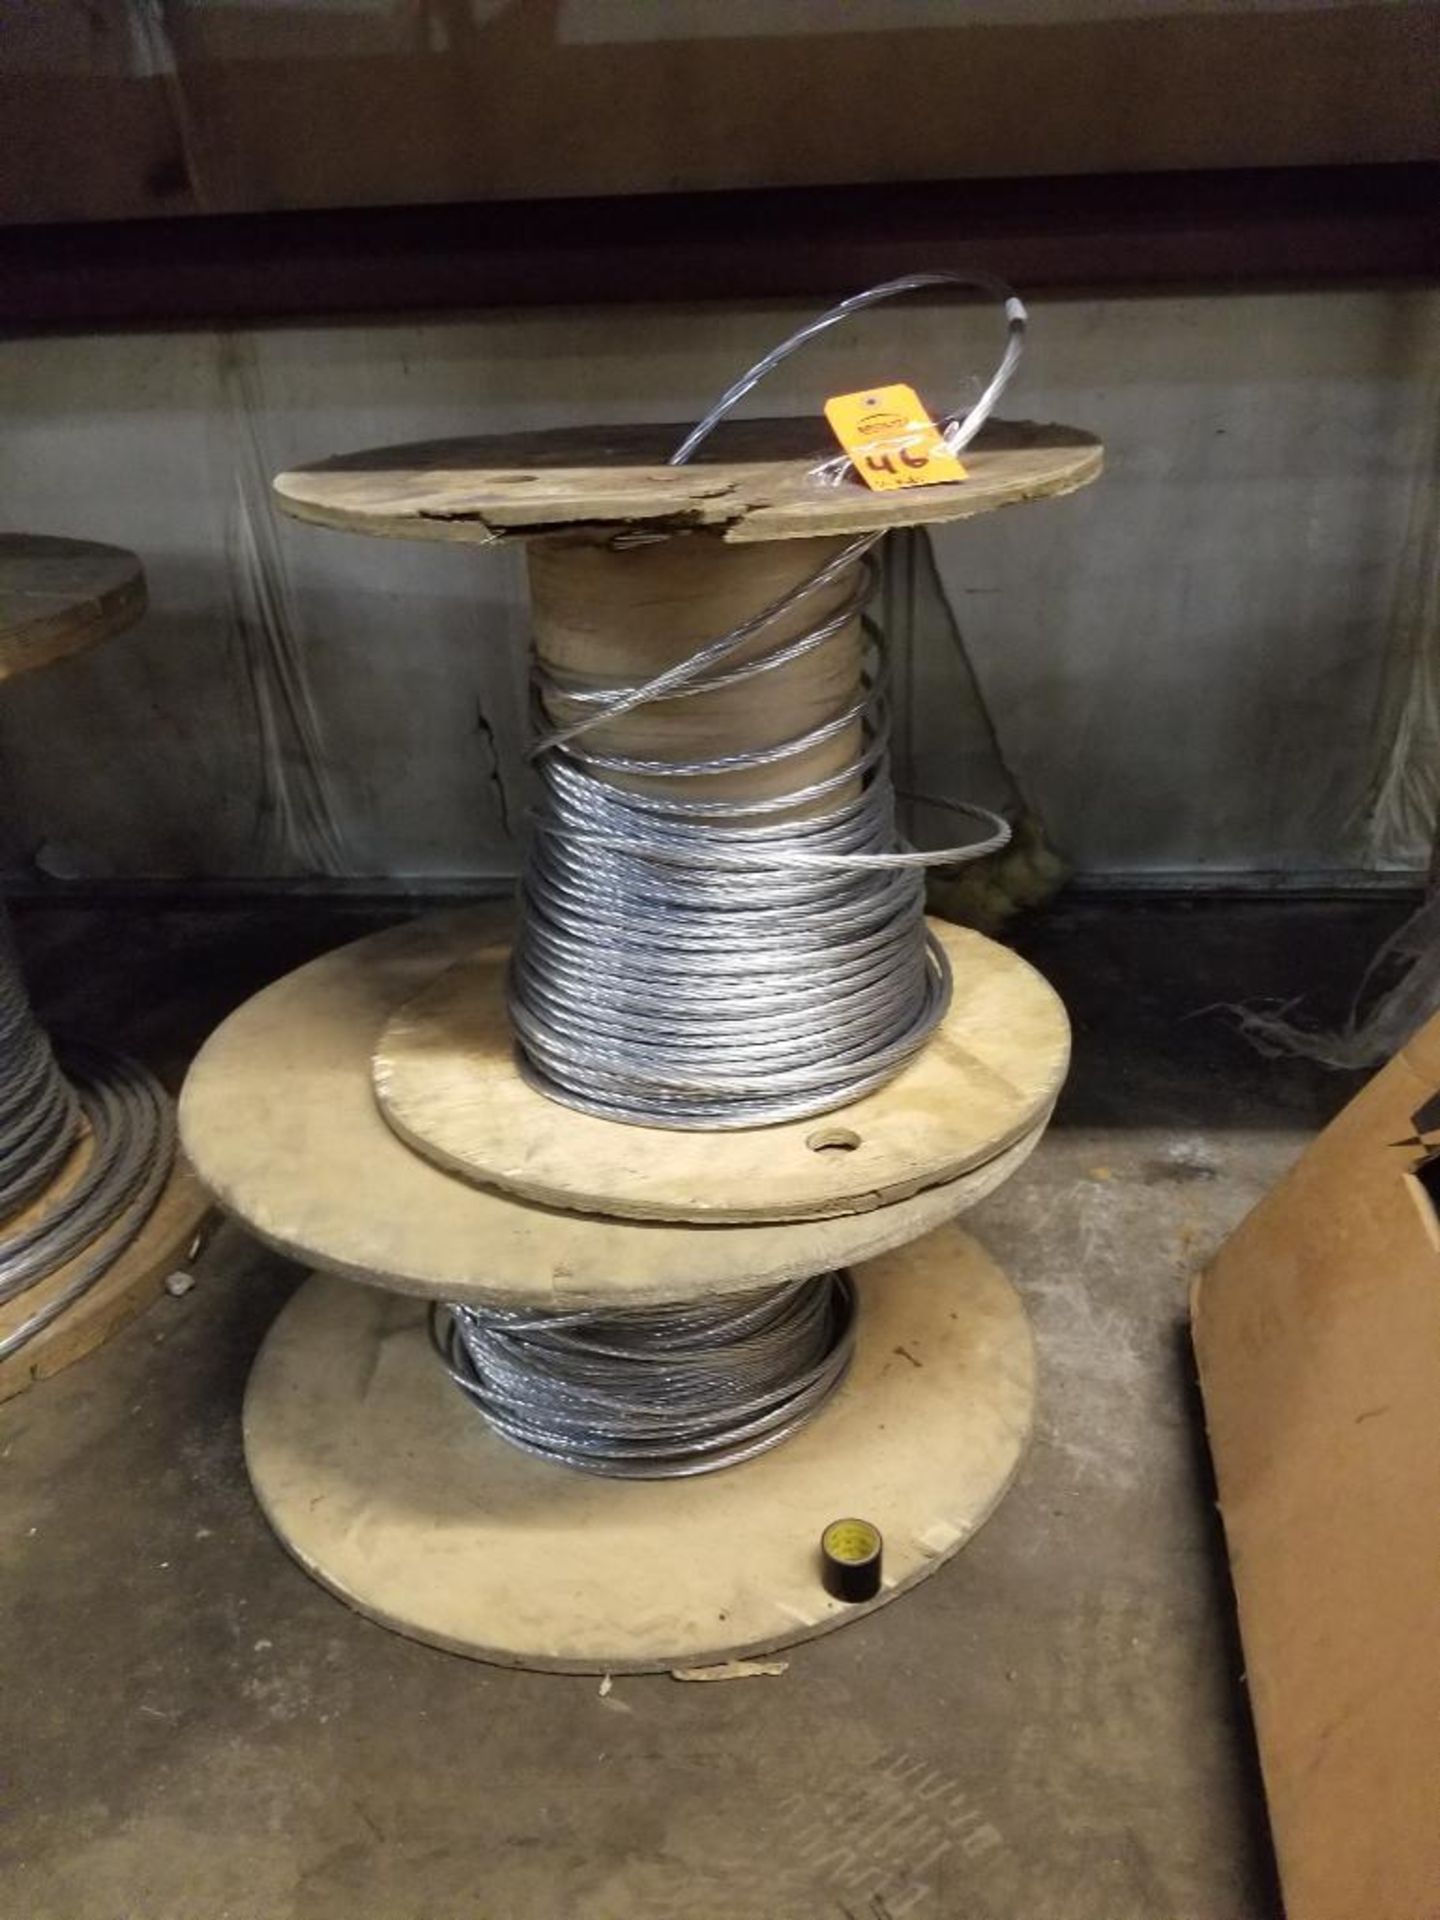 Qty 2 - Spool of bare wire.